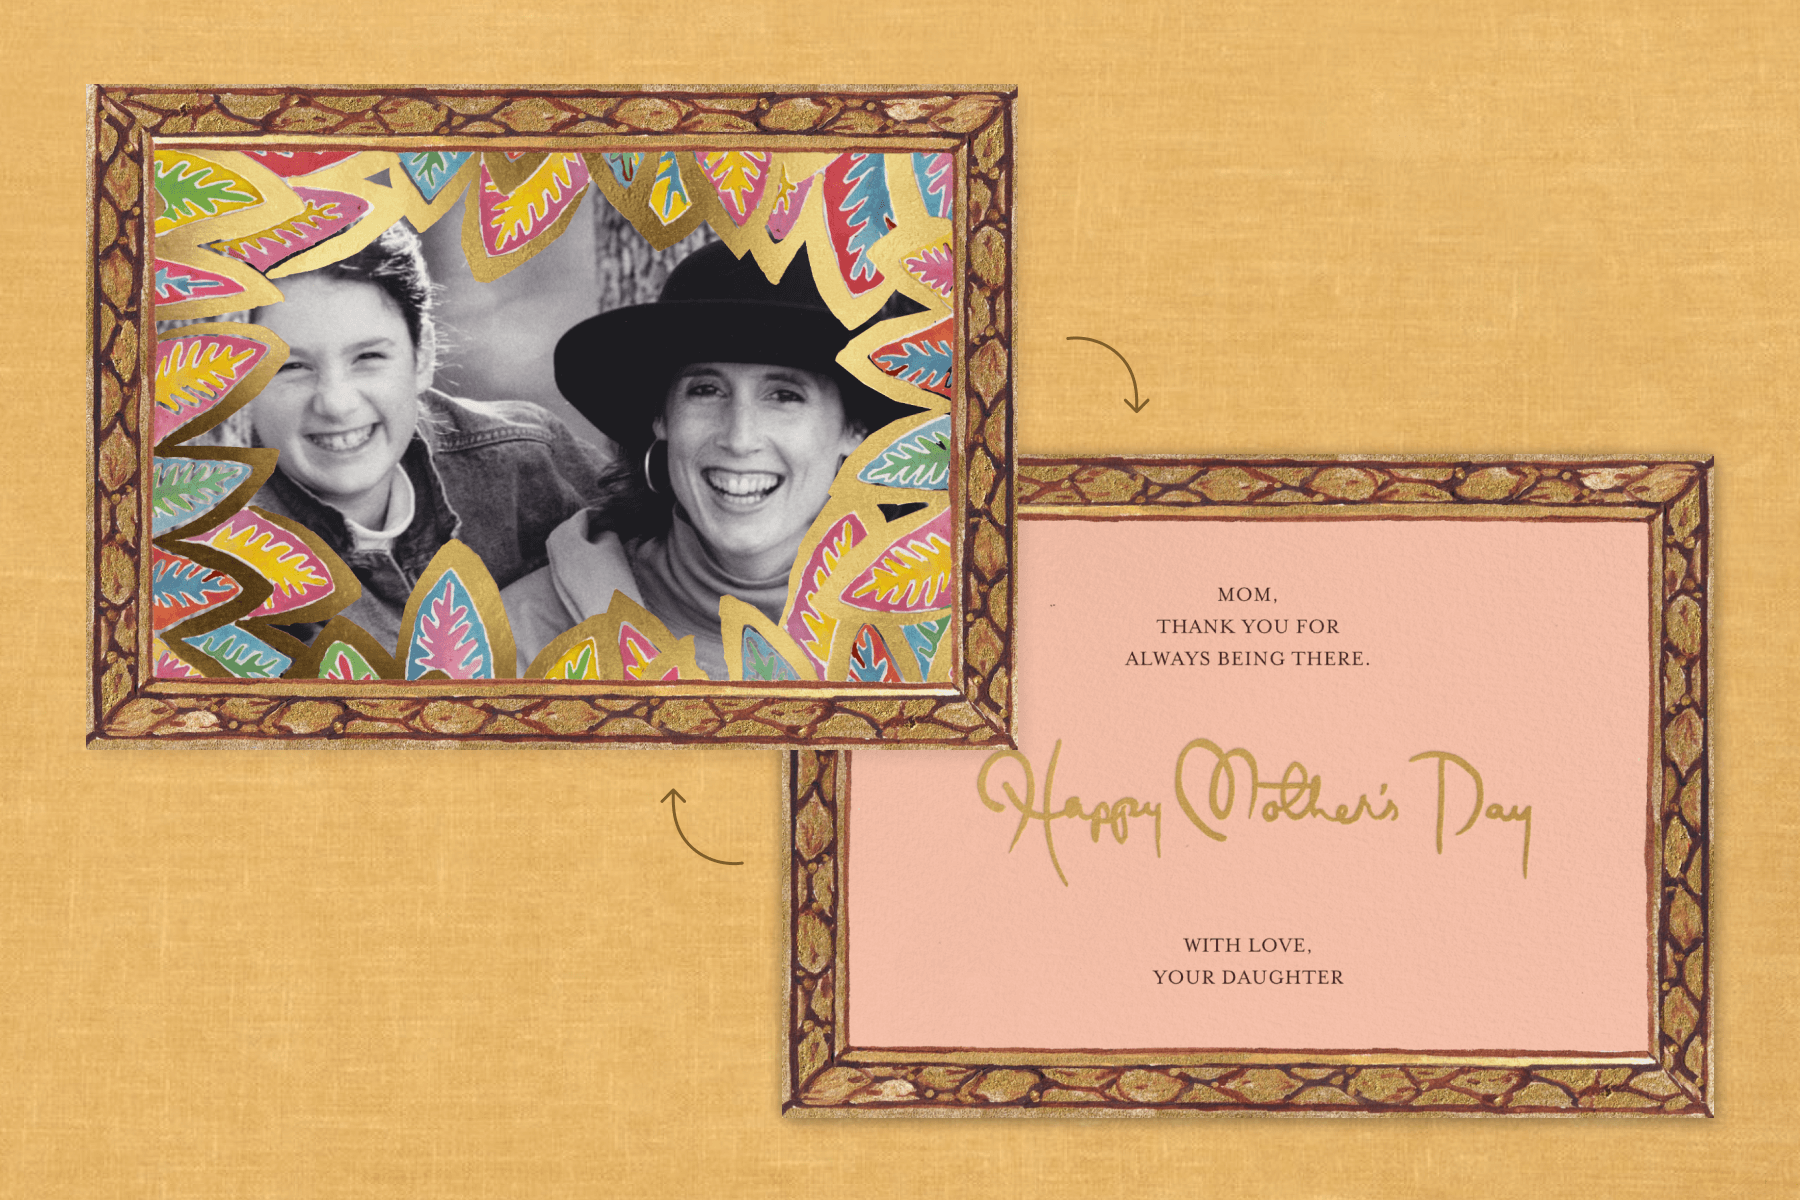 A card with a black and white photo of a young Happy Menocal with her mother Katharine Barnwell in a gold painted frame with colorful leafy border, and the reverse with a Mother’s Day message on a pink background.